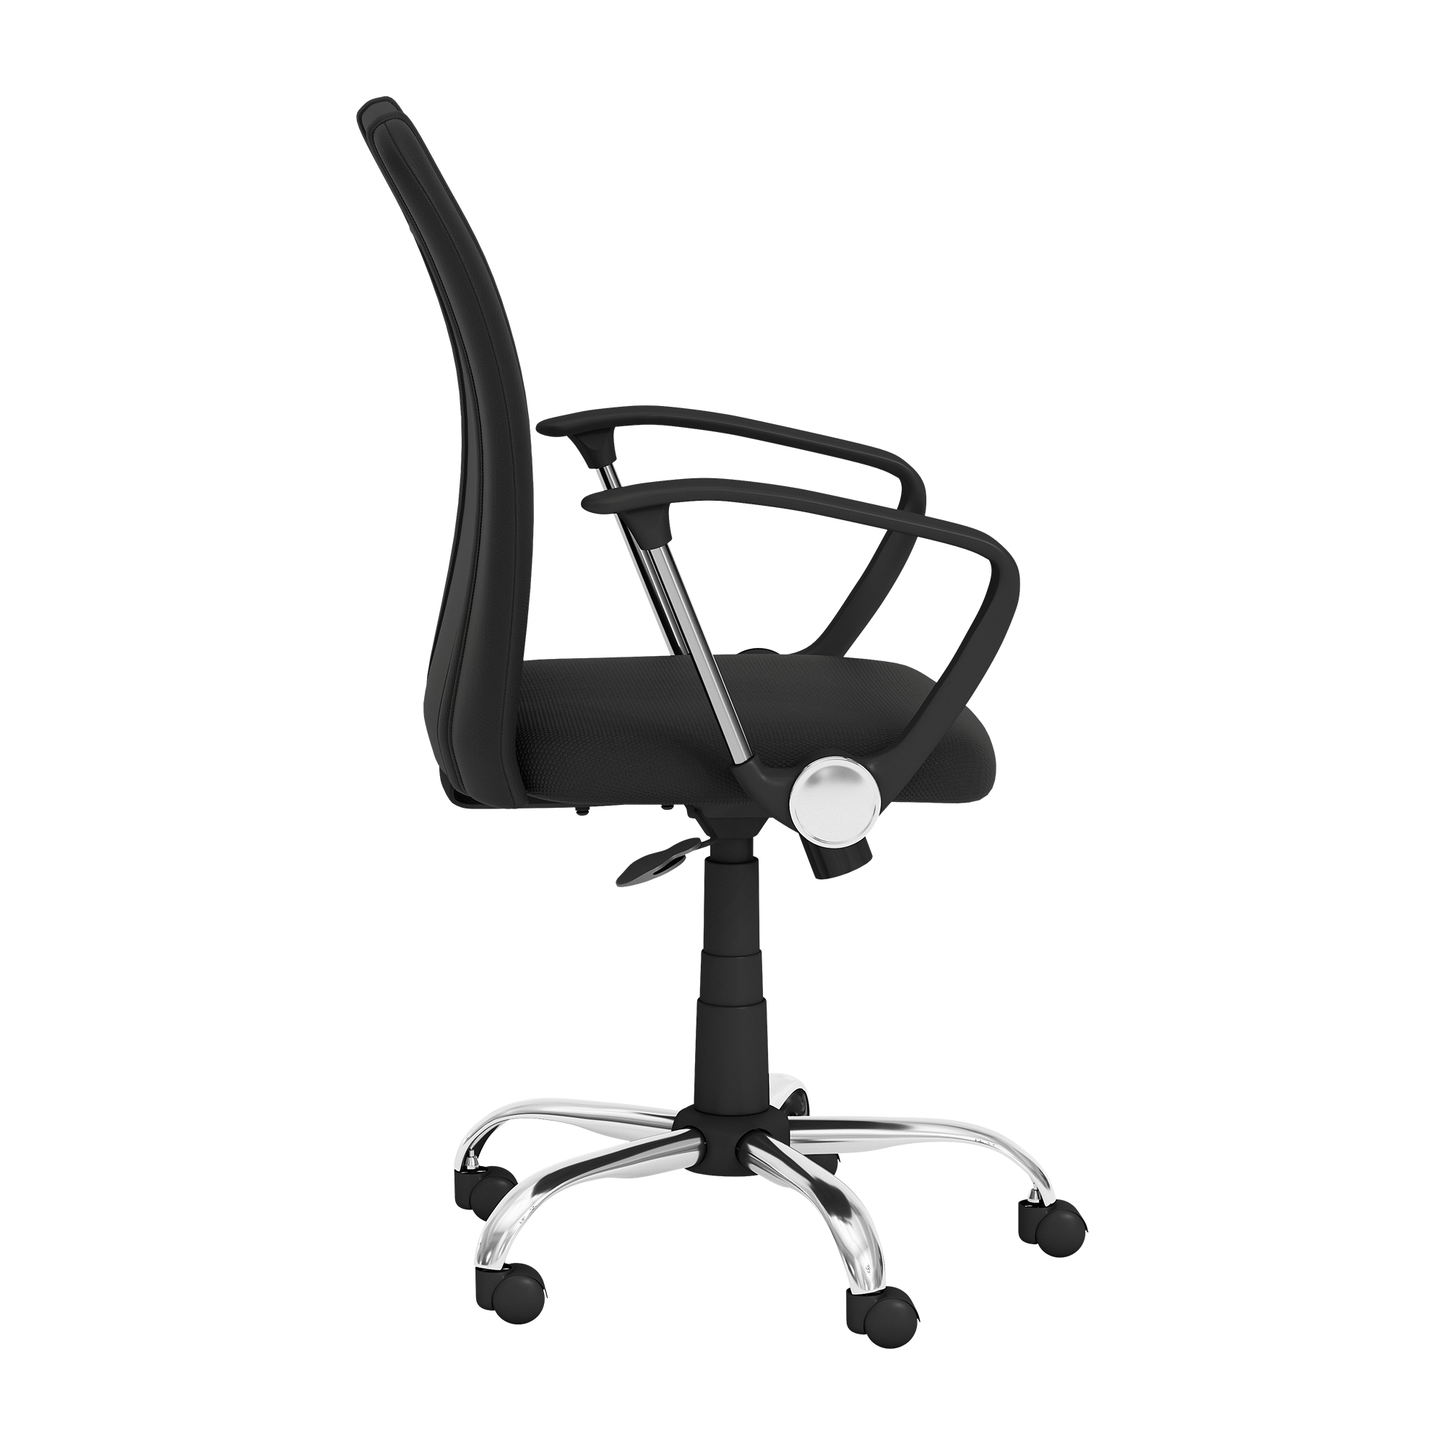 Curve Task Chair with Kansas City Royals Primary Logo